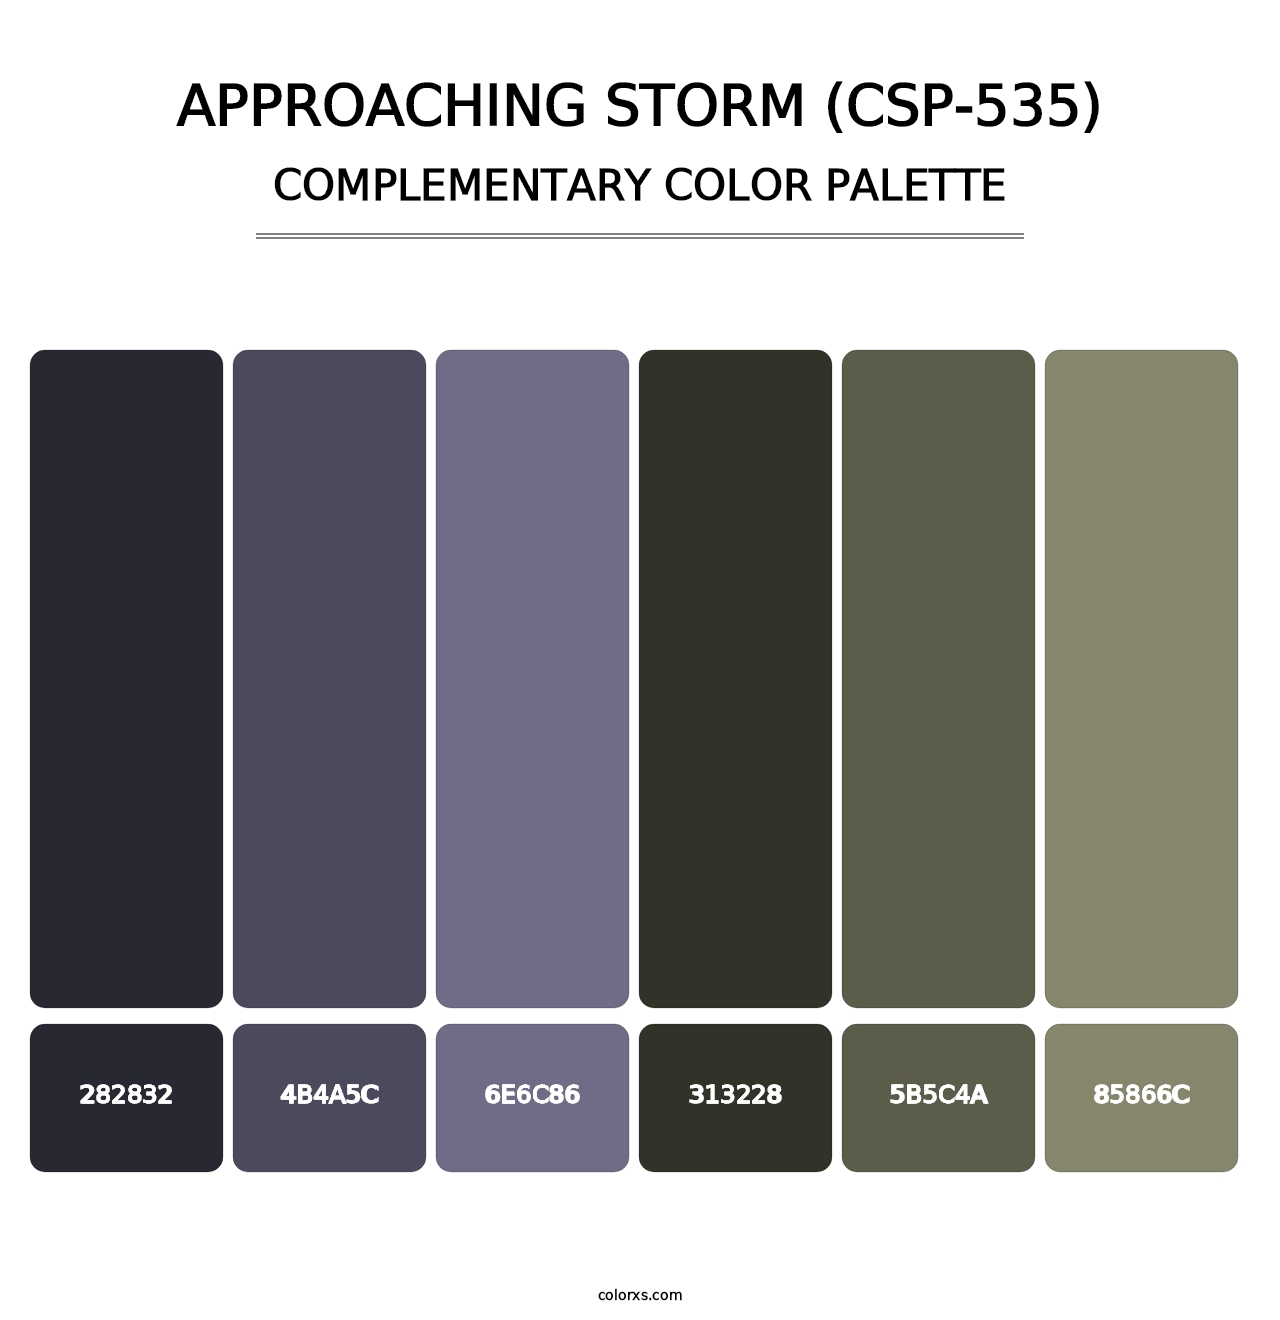 Approaching Storm (CSP-535) - Complementary Color Palette